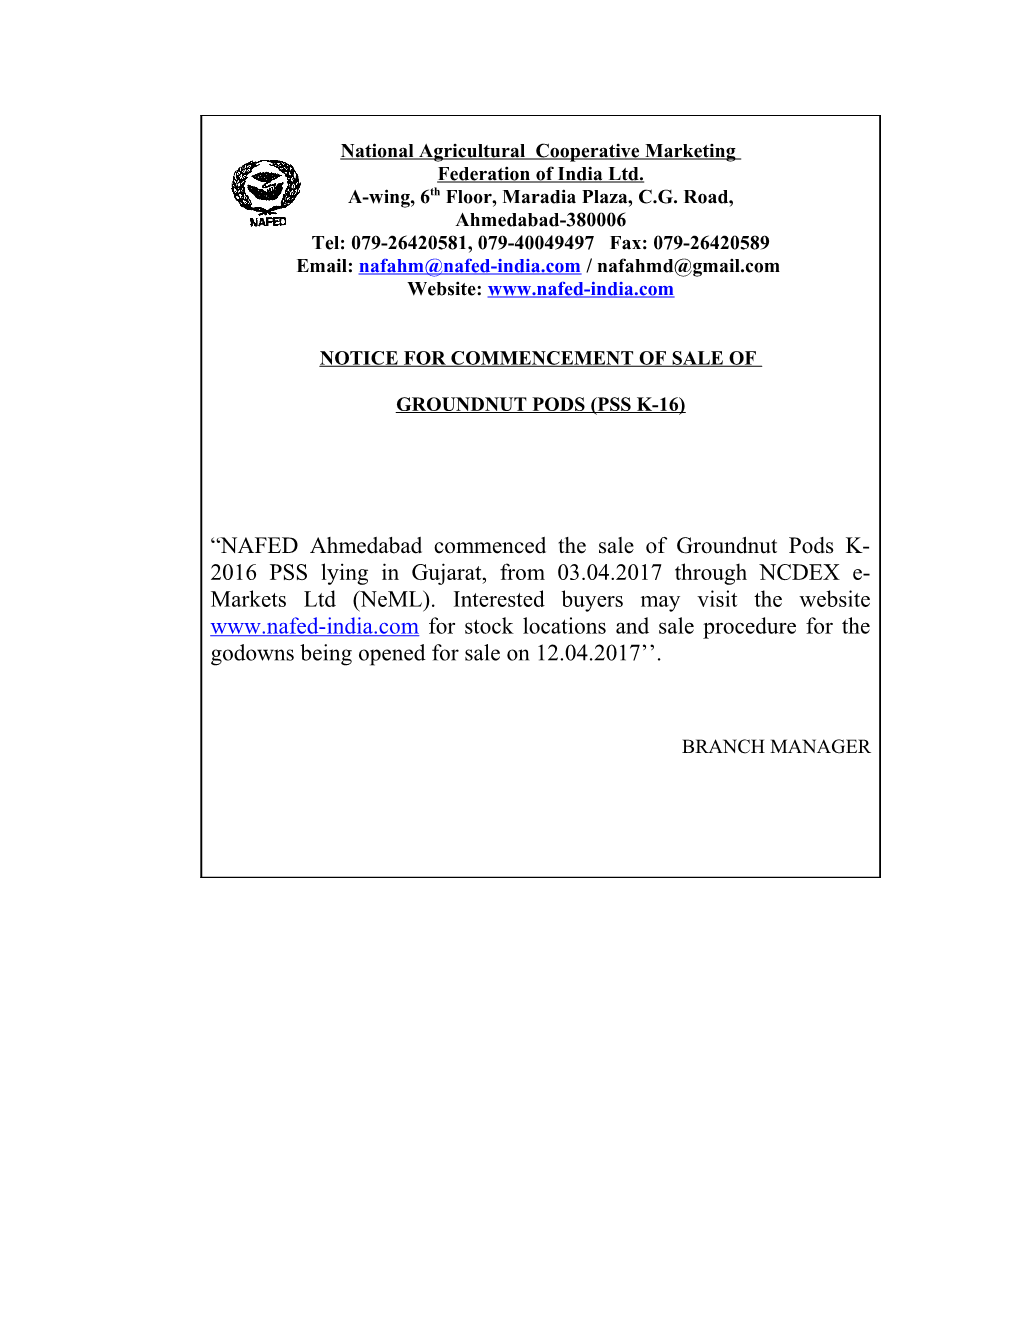 Terms and Conditions for Sale of Groundnut in Gujarat Through NCDEX E Markets Ltd.